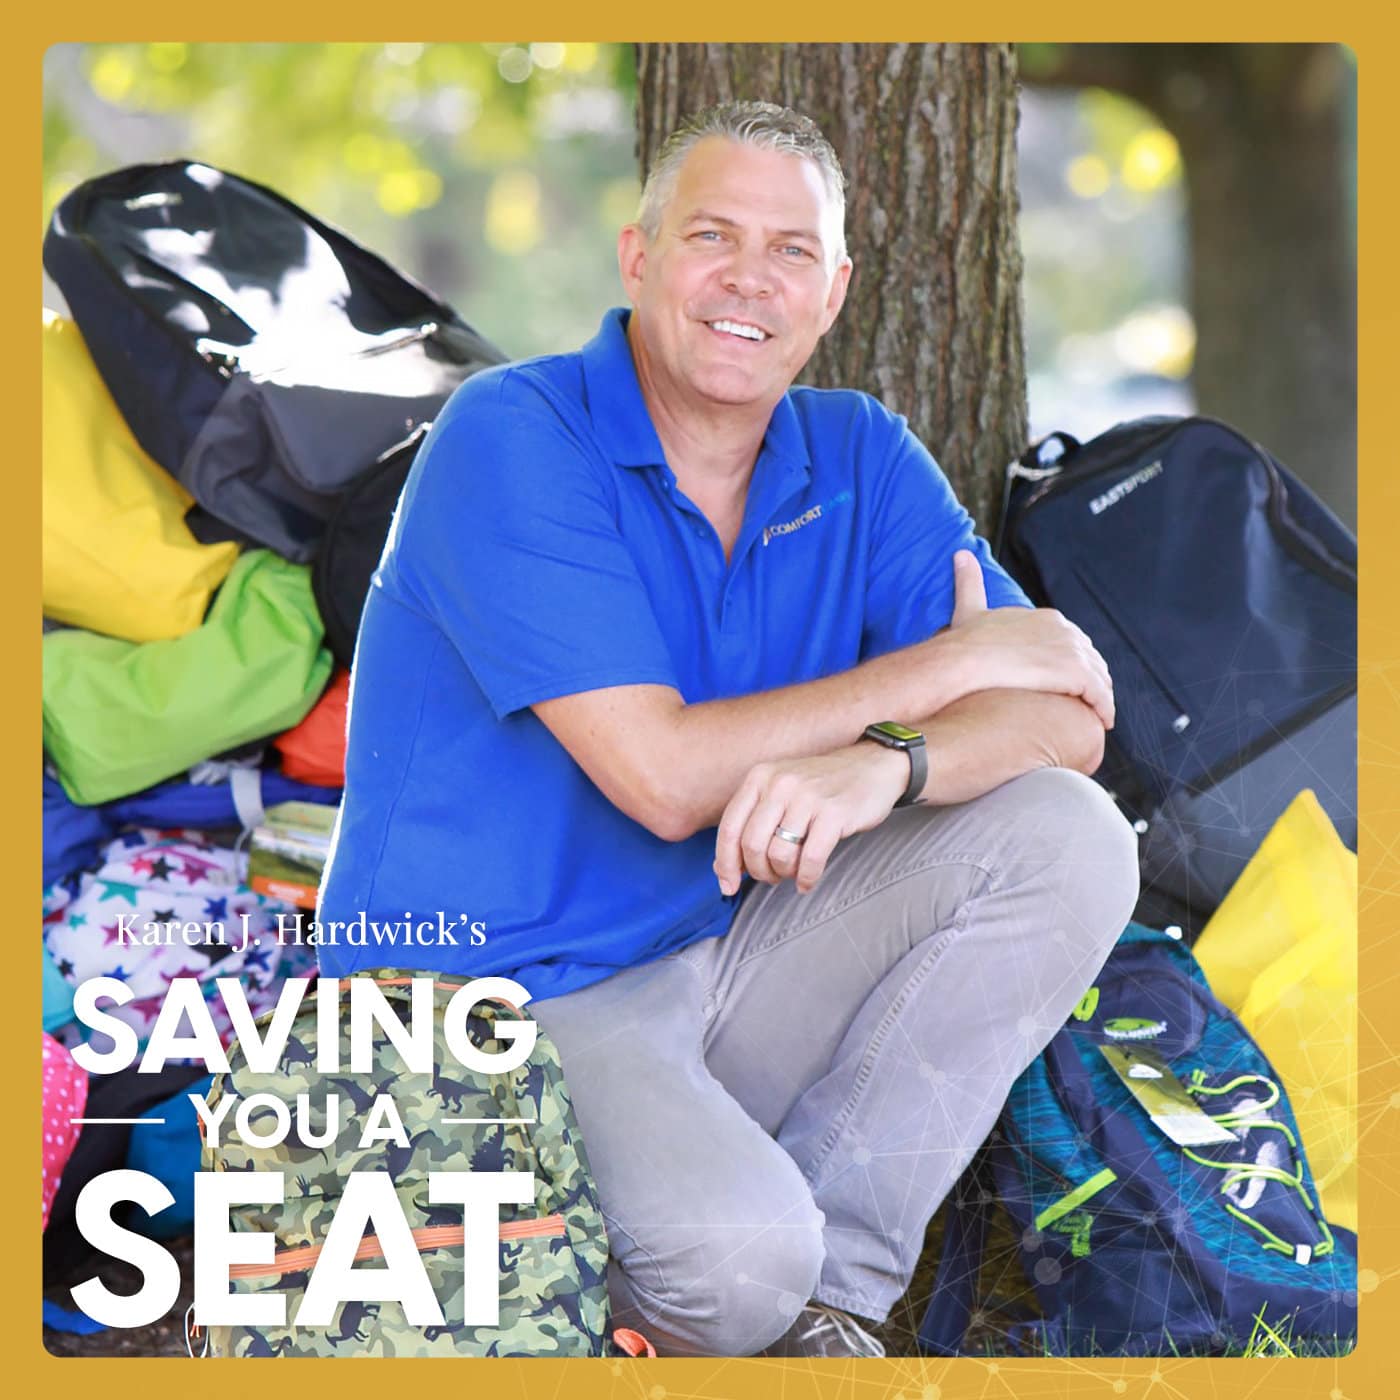 Karen J. Hardwick "Saving You A Seat" podcast cover with guest Rob Scheer